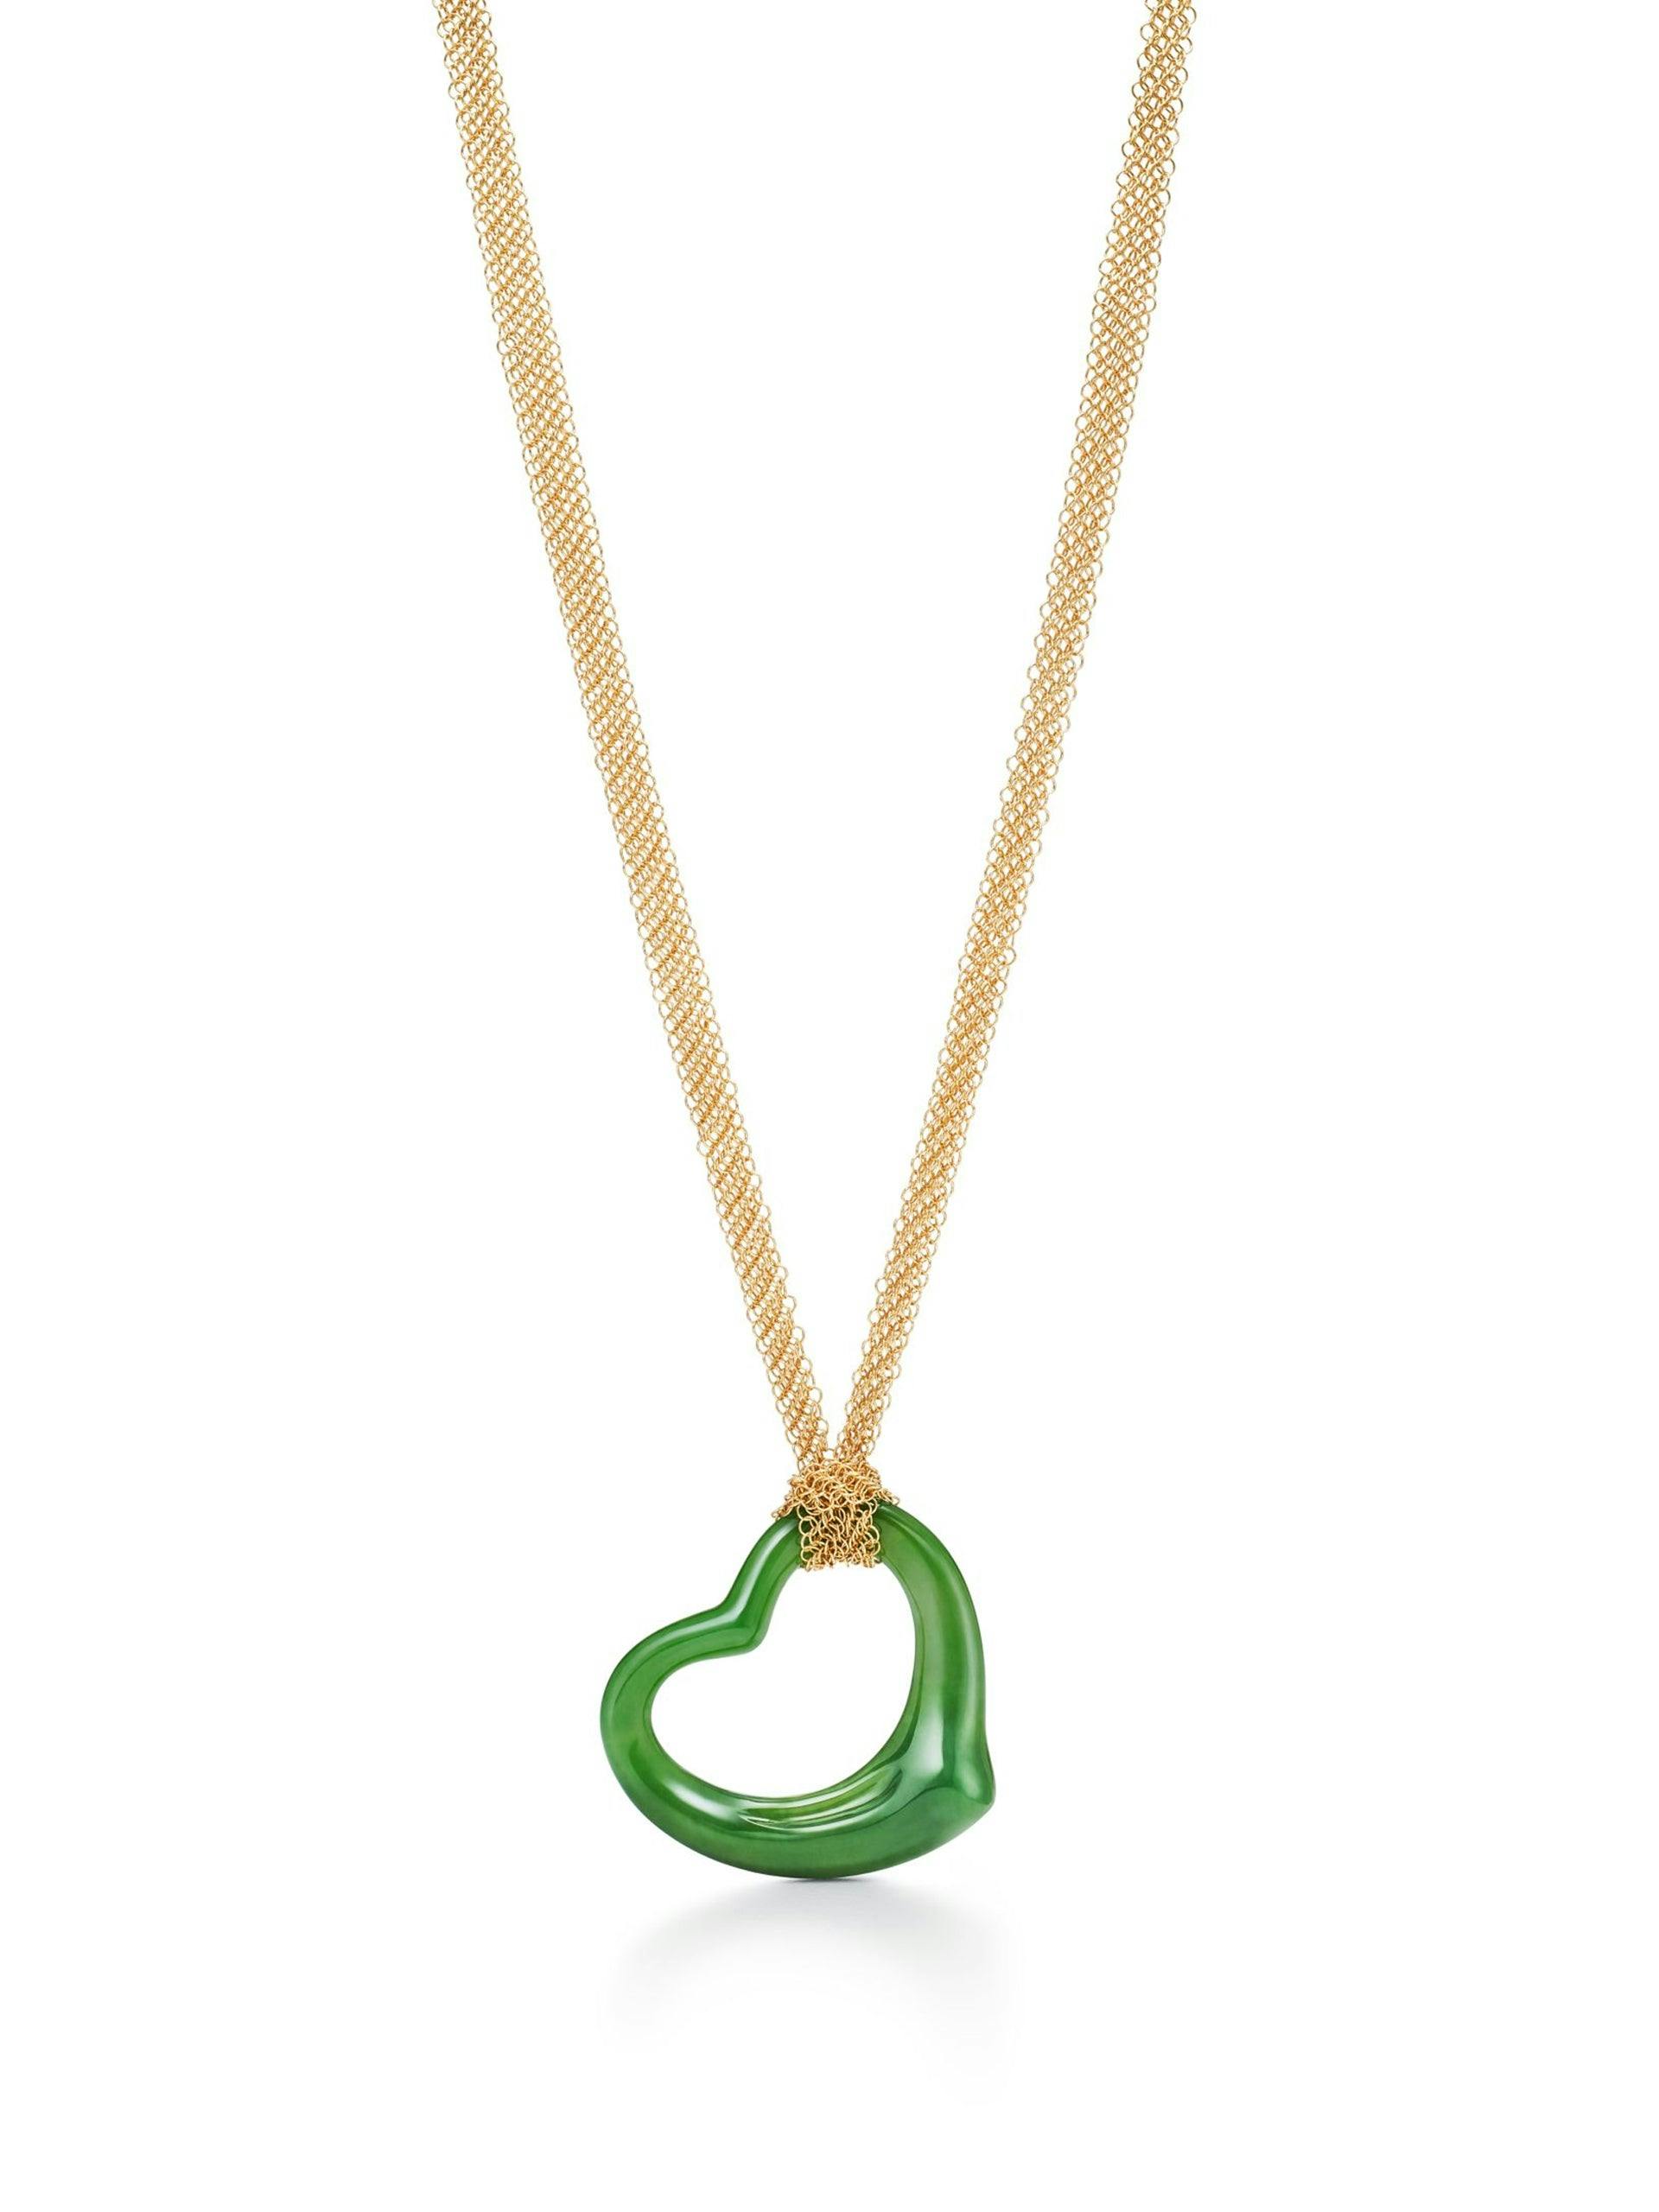 Green heart necklace